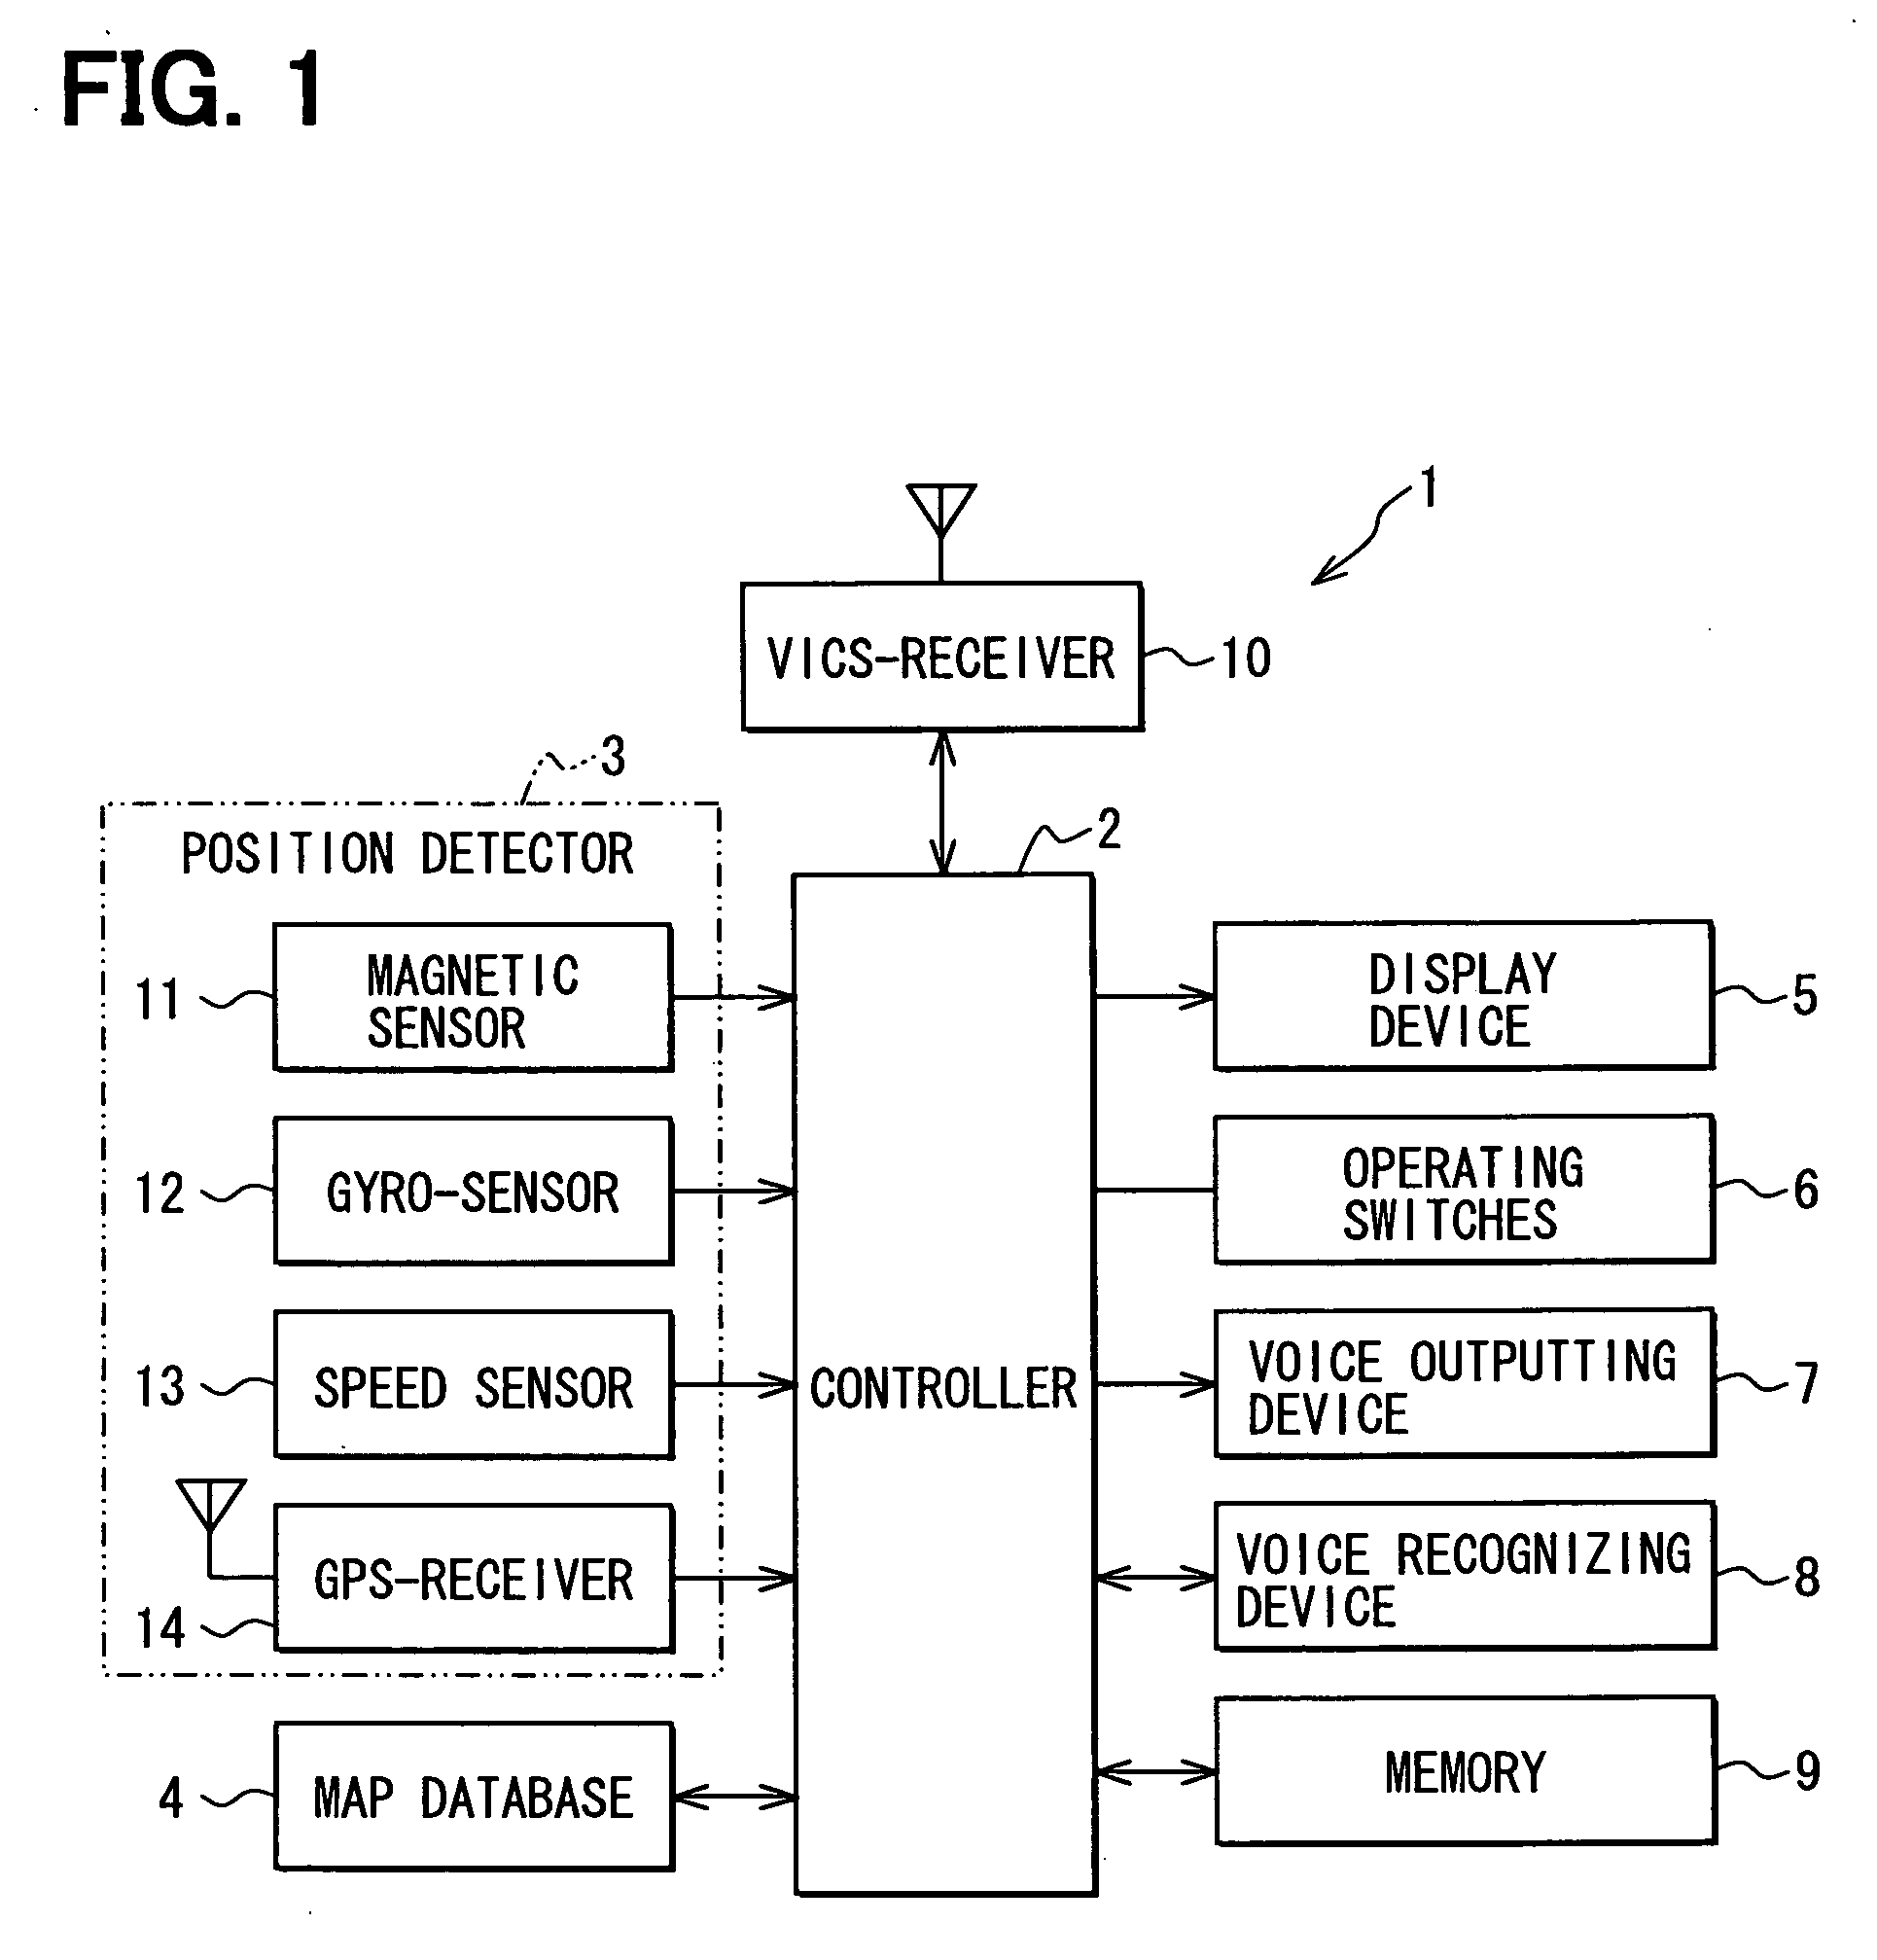 Command-inputting device having display panel